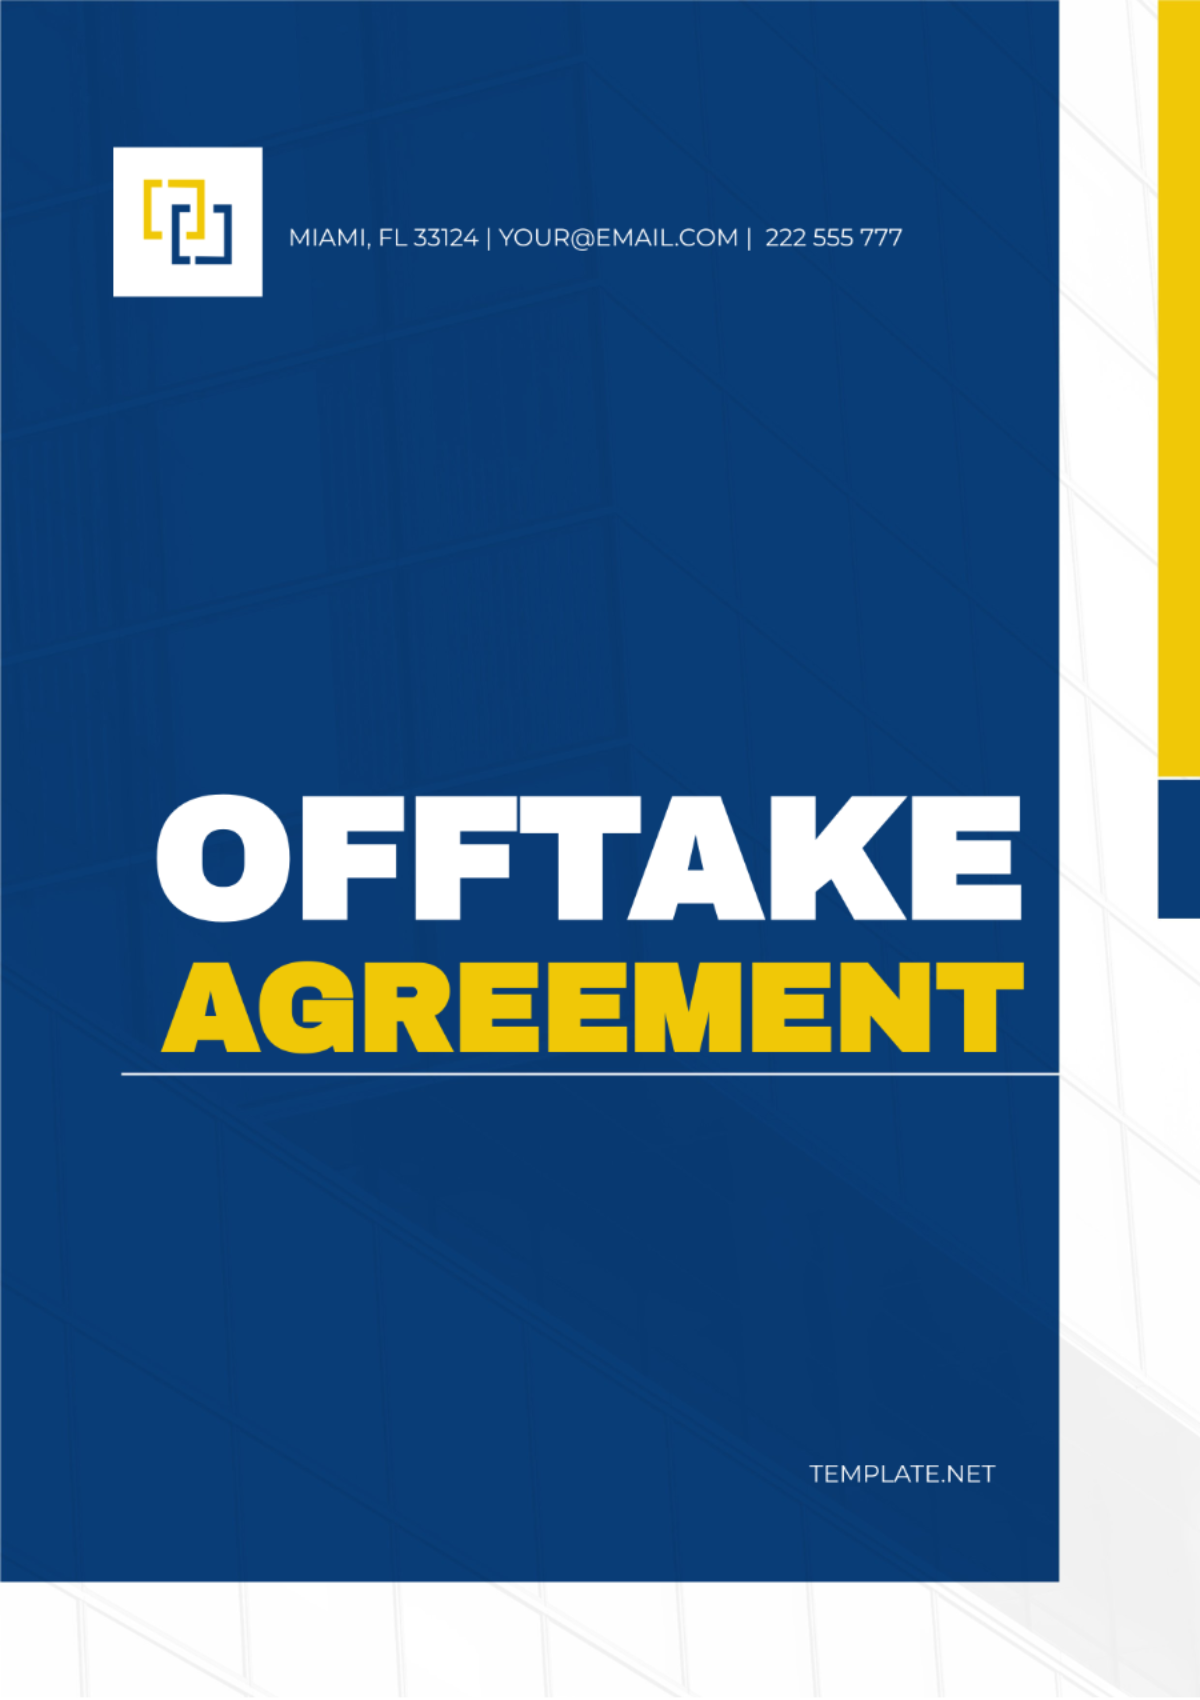 Offtake Agreement Template